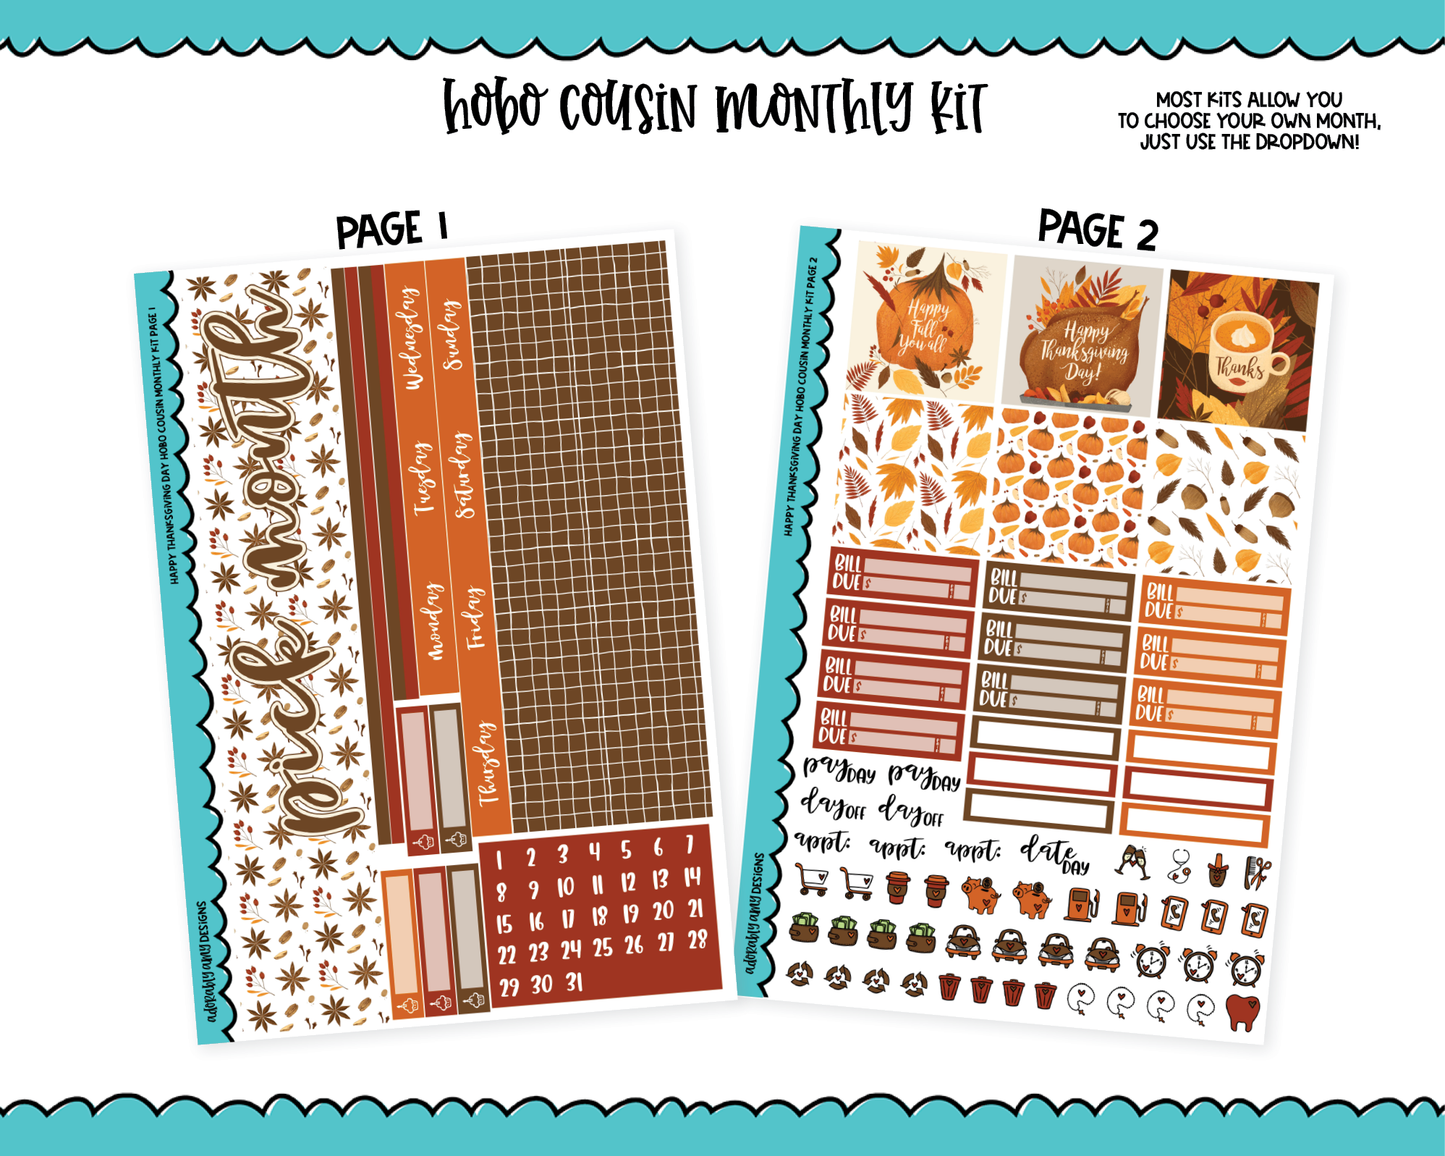 Hobonichi Cousin Monthly Pick Your Month Happy Thanksgiving Day Thanksgiving Themed Planner Sticker Kit for Hobo Cousin or Similar Planners